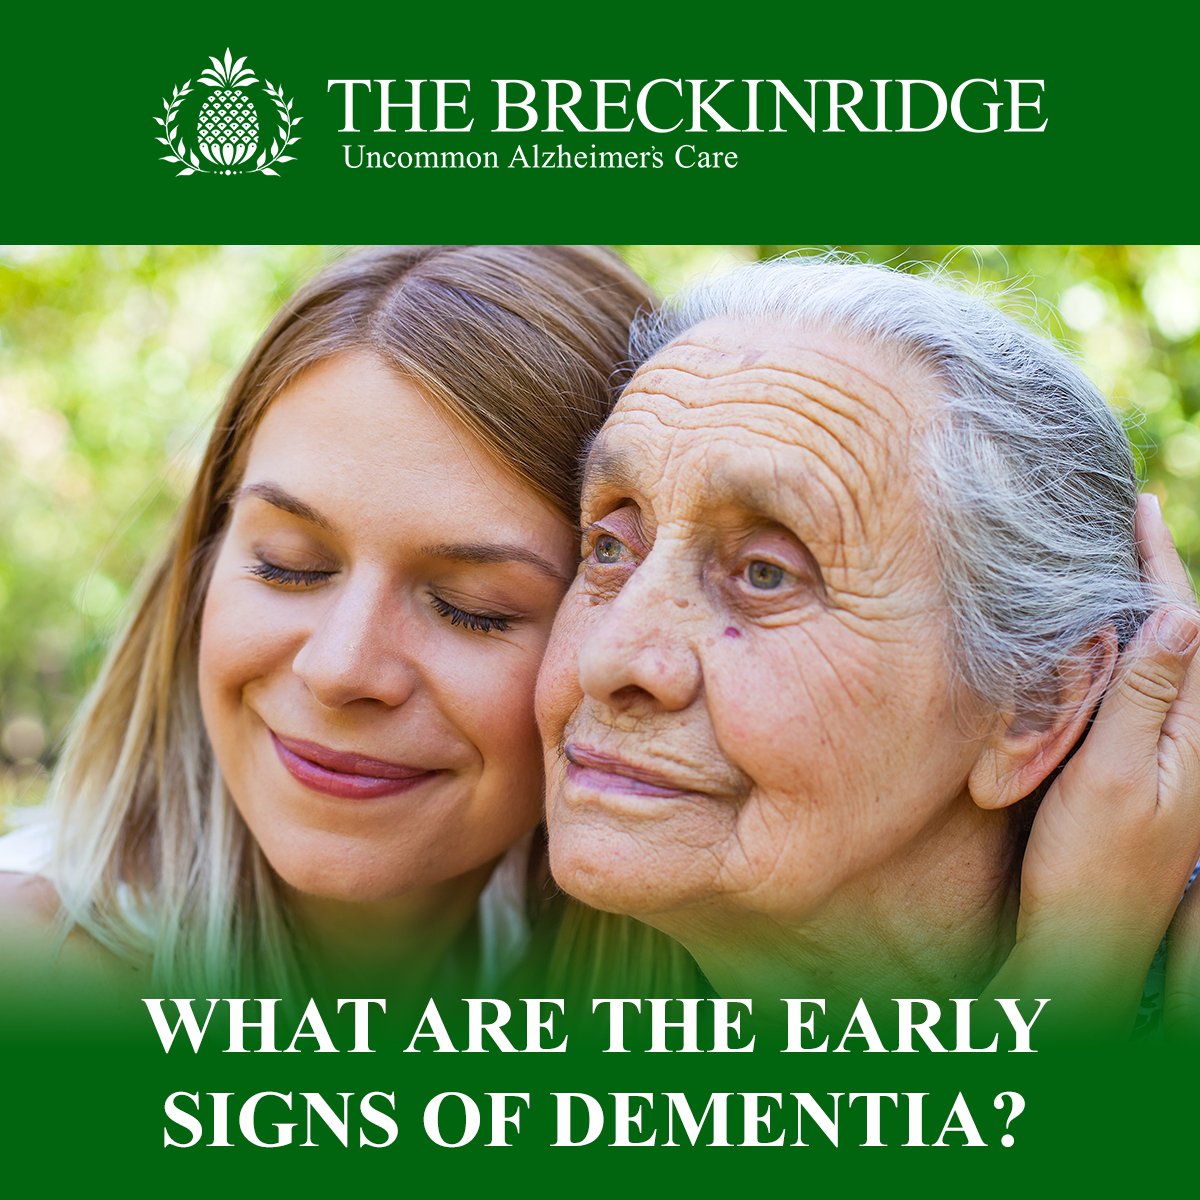 WHAT ARE THE EARLY SIGNS OF DEMENTIA?
thebreckinridge.com/what-are-the-e… 

#memorycare #TheBreckinridge #dementiacare #AlzheimersCare #Alzheimers #Dementia #MemoryCare #BreckinridgeLexington